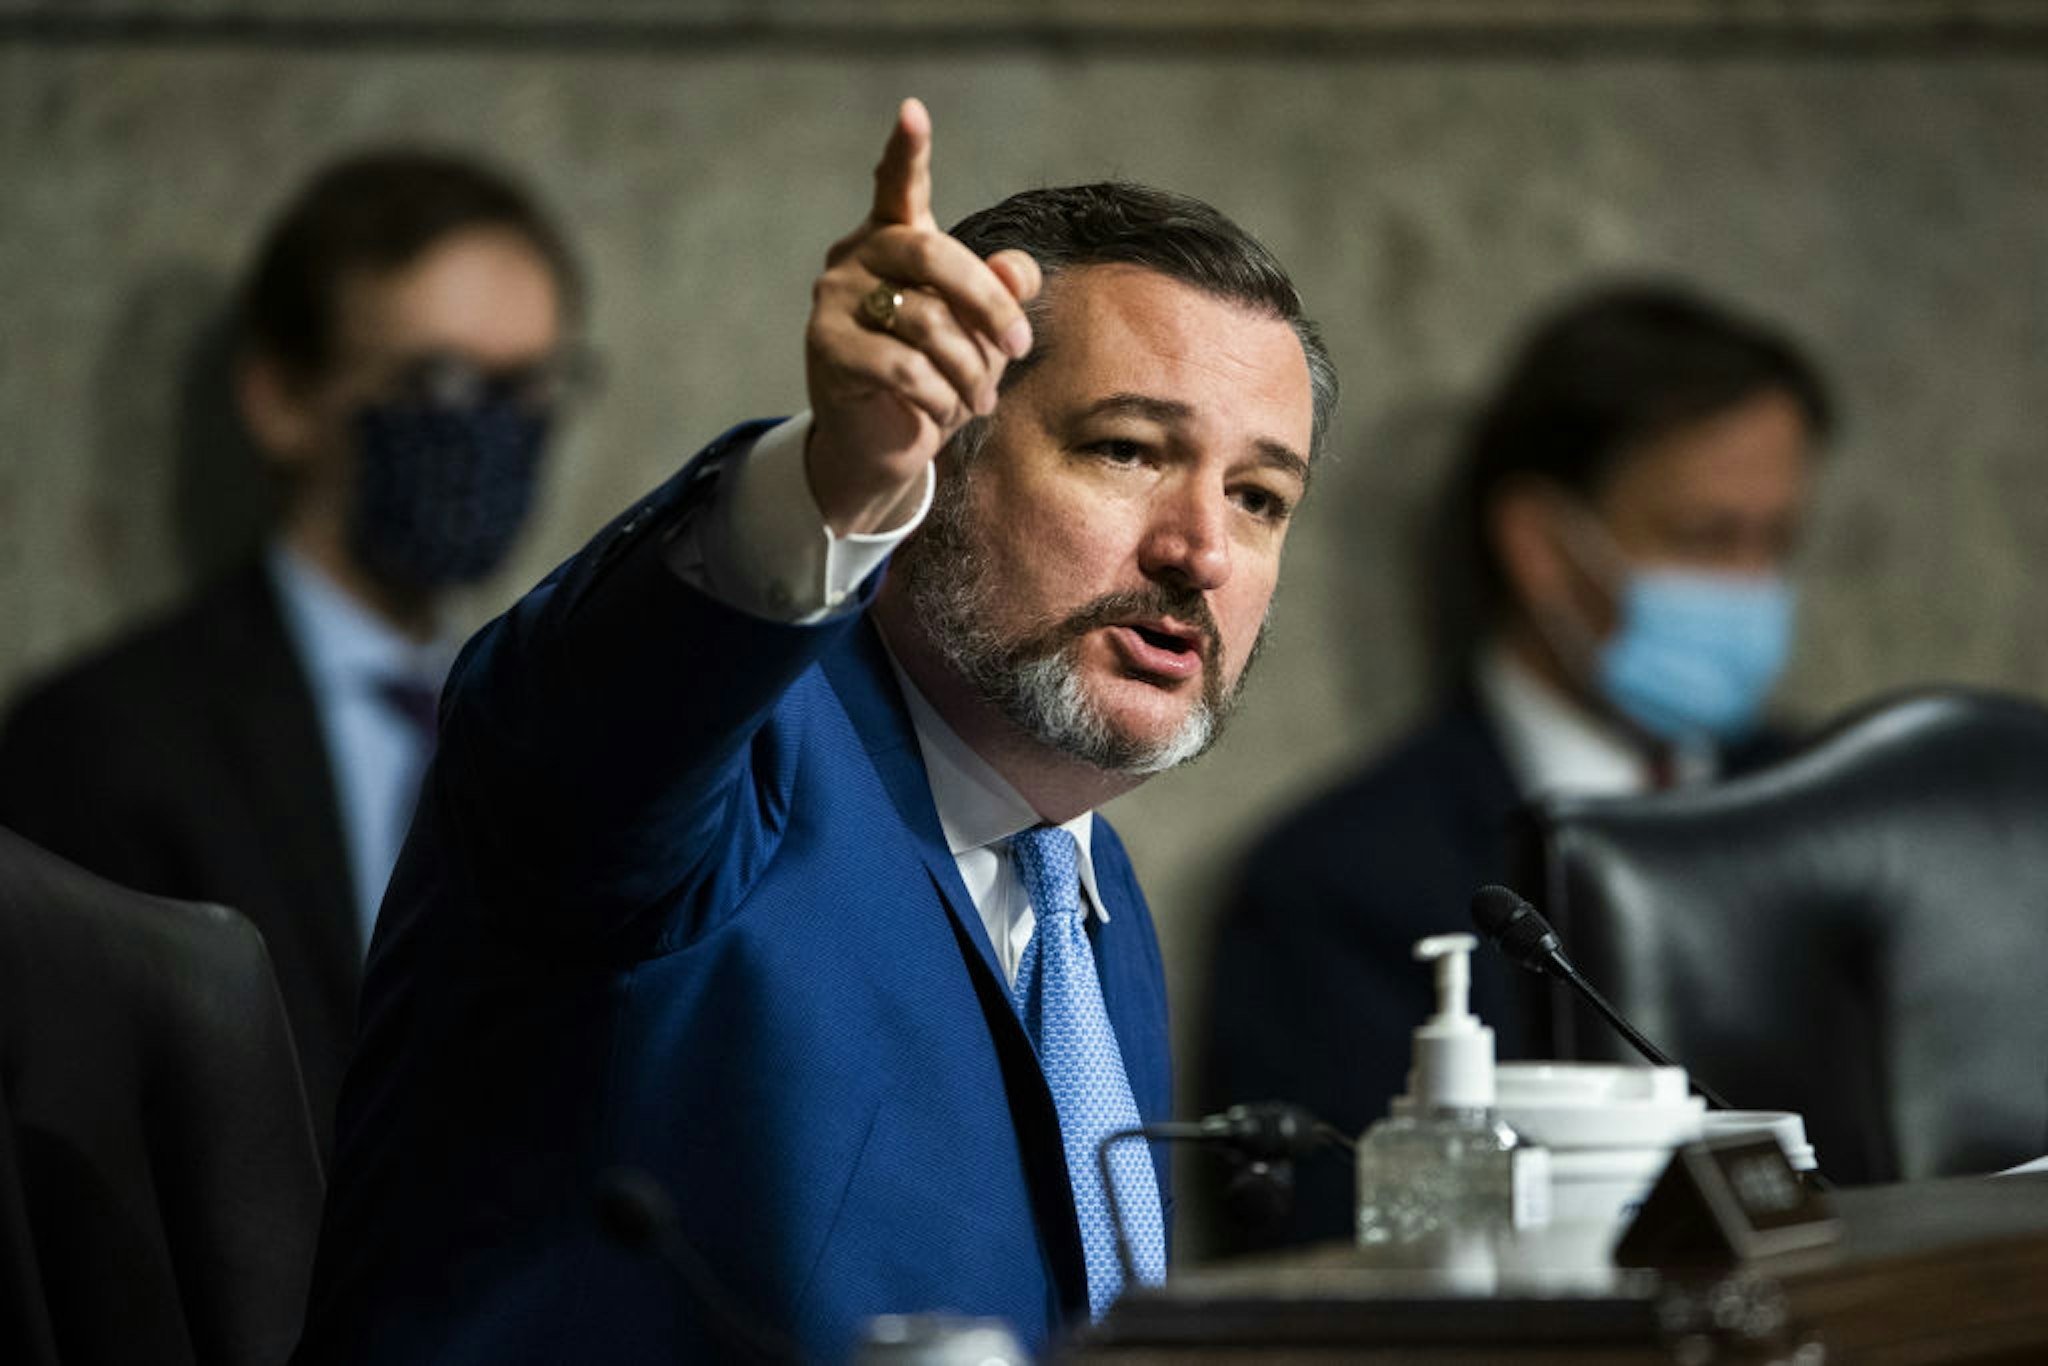 Senator Ted Cruz, a Republican from Texas, speaks during a Senate Judiciary Committee hearing with Rod Rosenstein, former deputy attorney general, in Washington, D.C., U.S., on Wednesday, June 3, 2020.